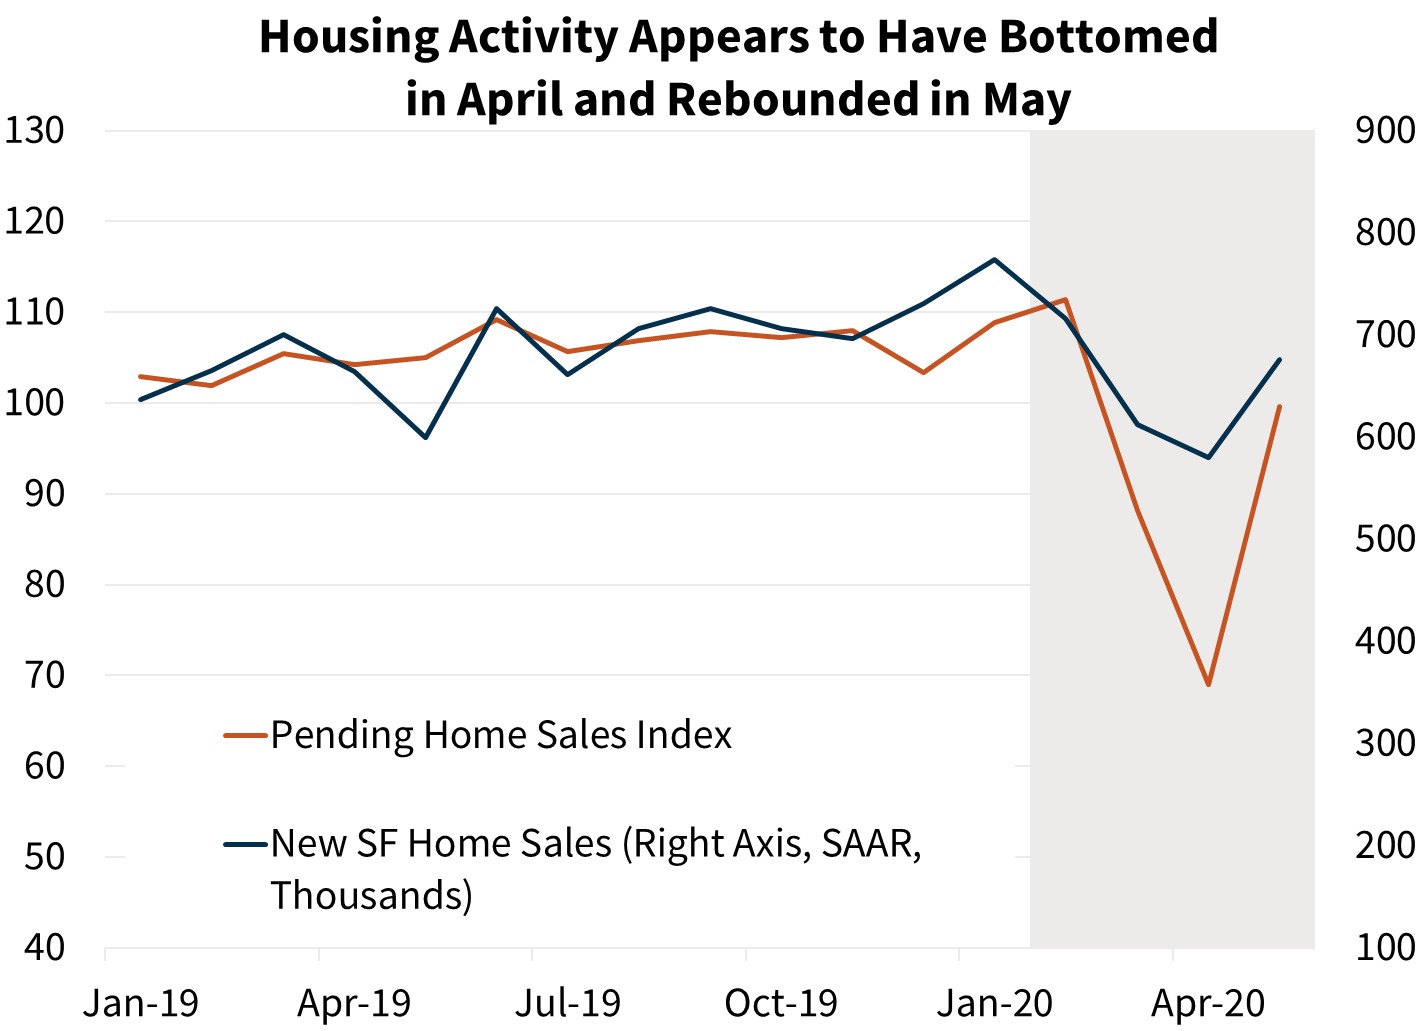 Housing Activity Appears to Have Bottomed in April and Rebounded in May